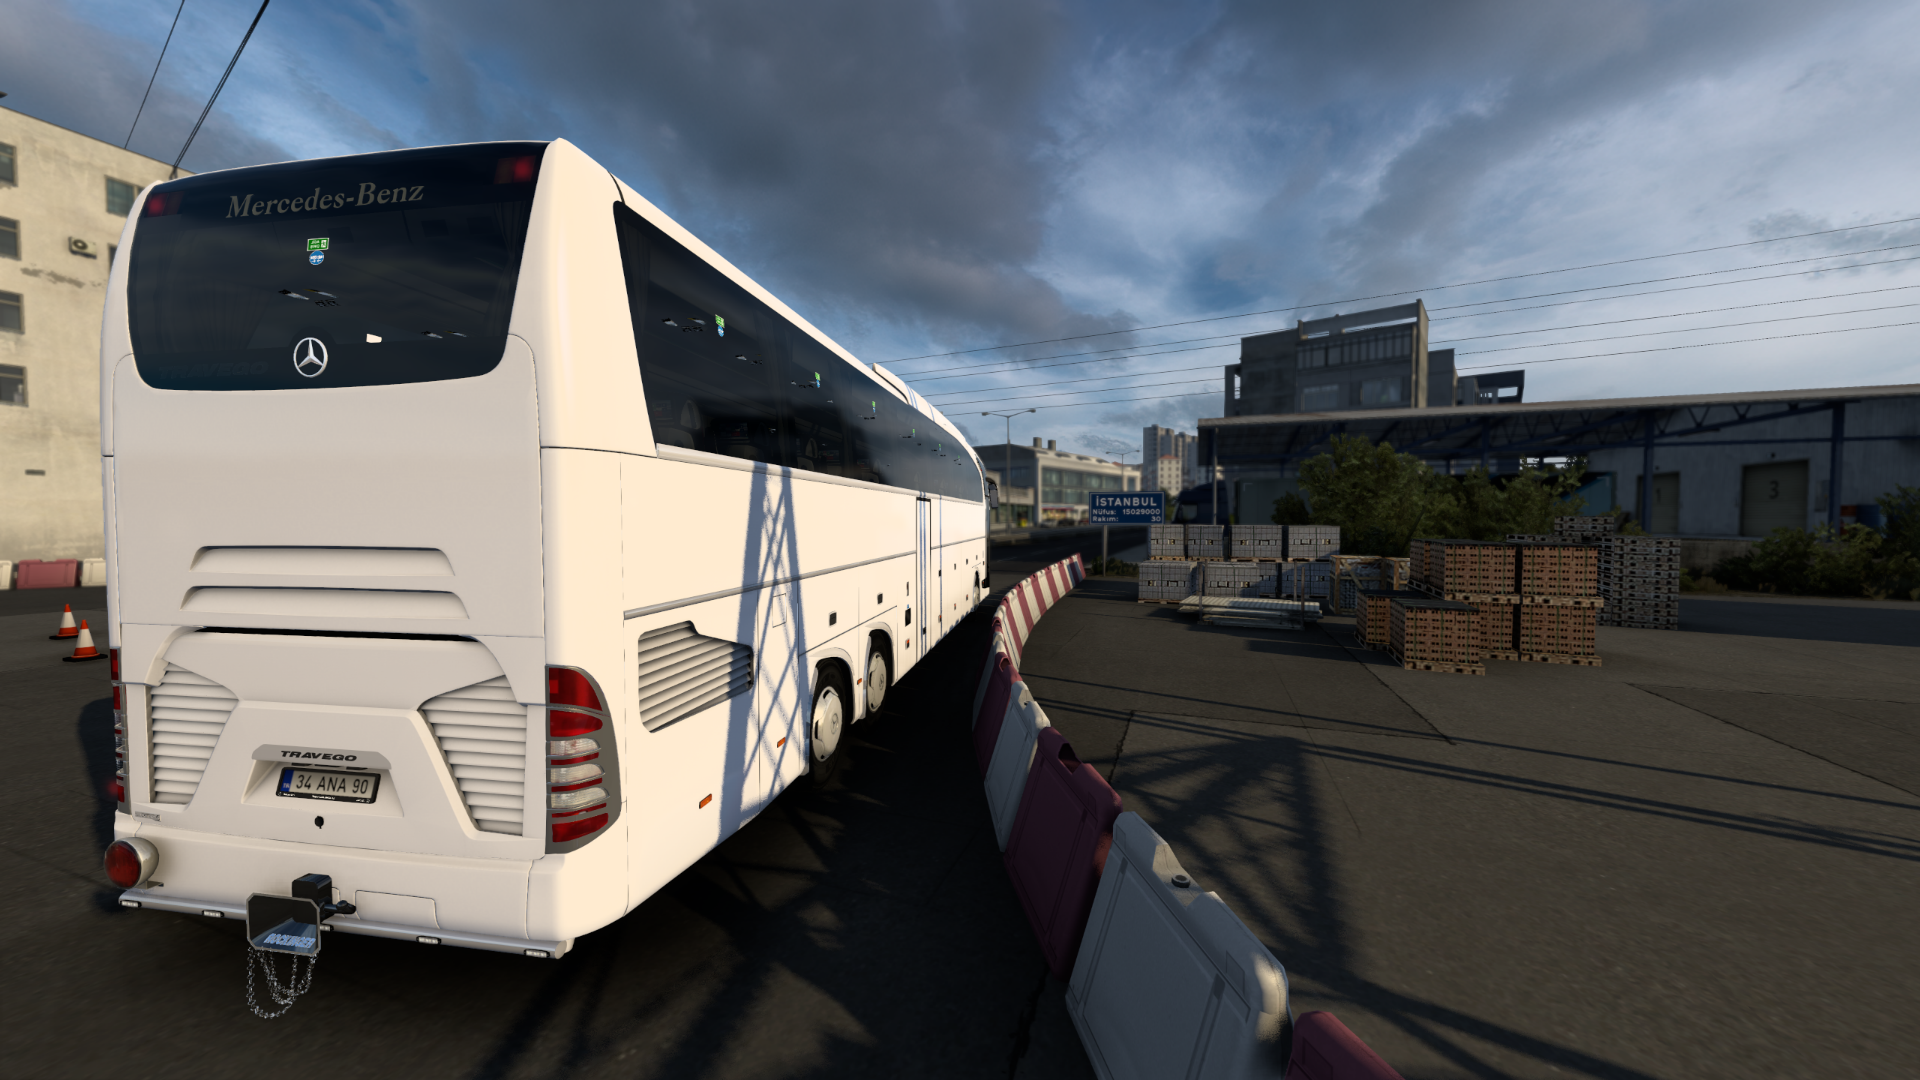 ets2_20220501_002838_00-1920.png